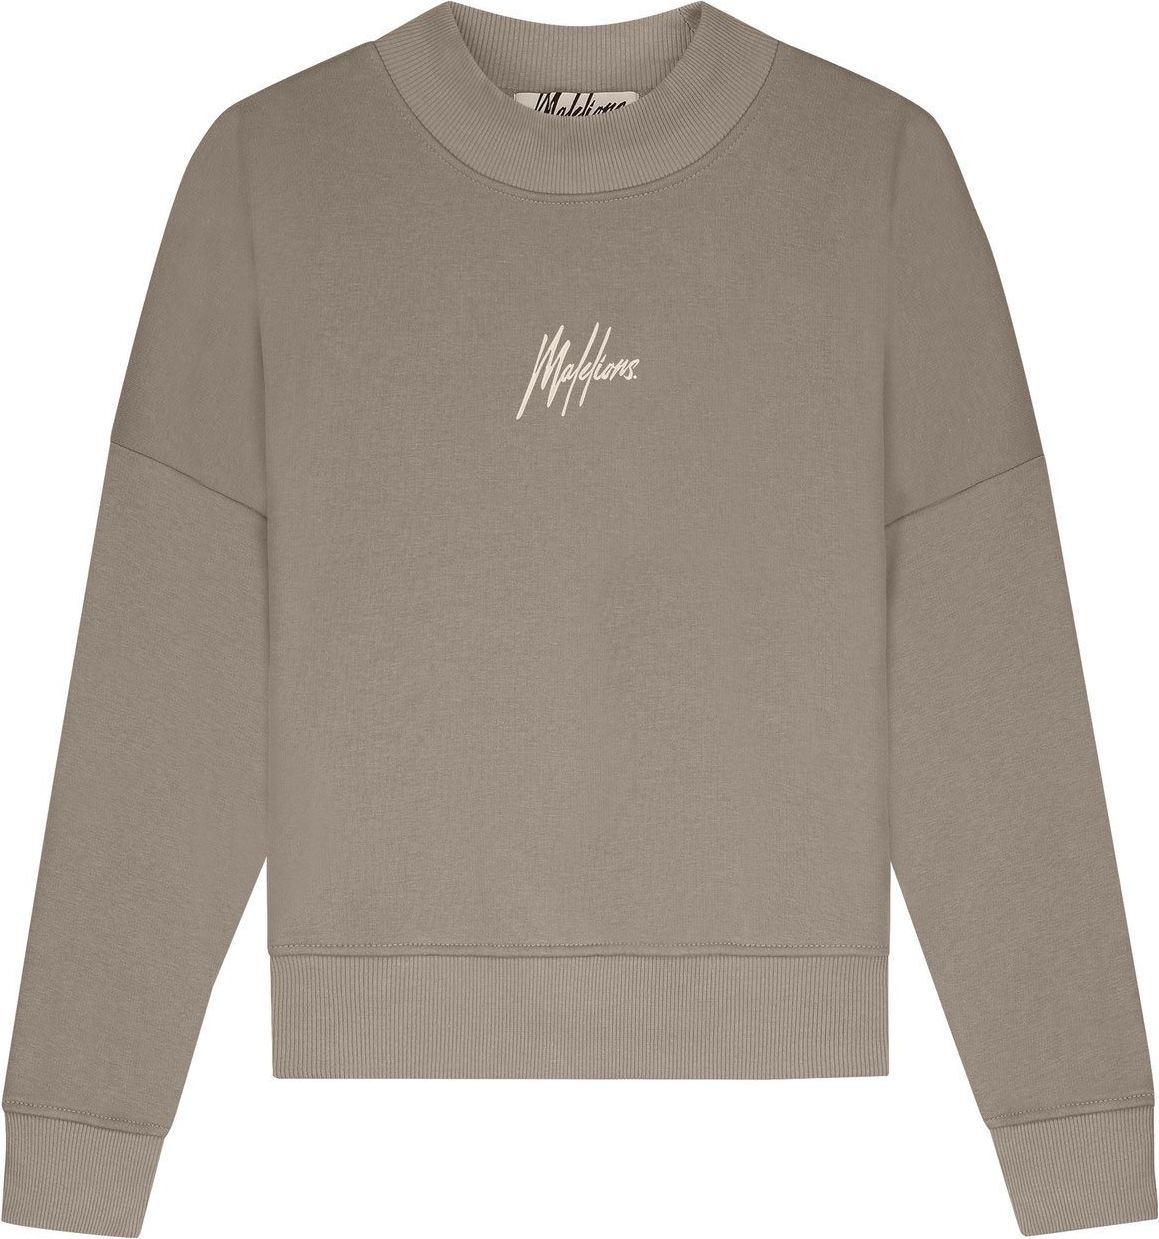 Malelions Brand Sweater - Taupe/Beige Taupe